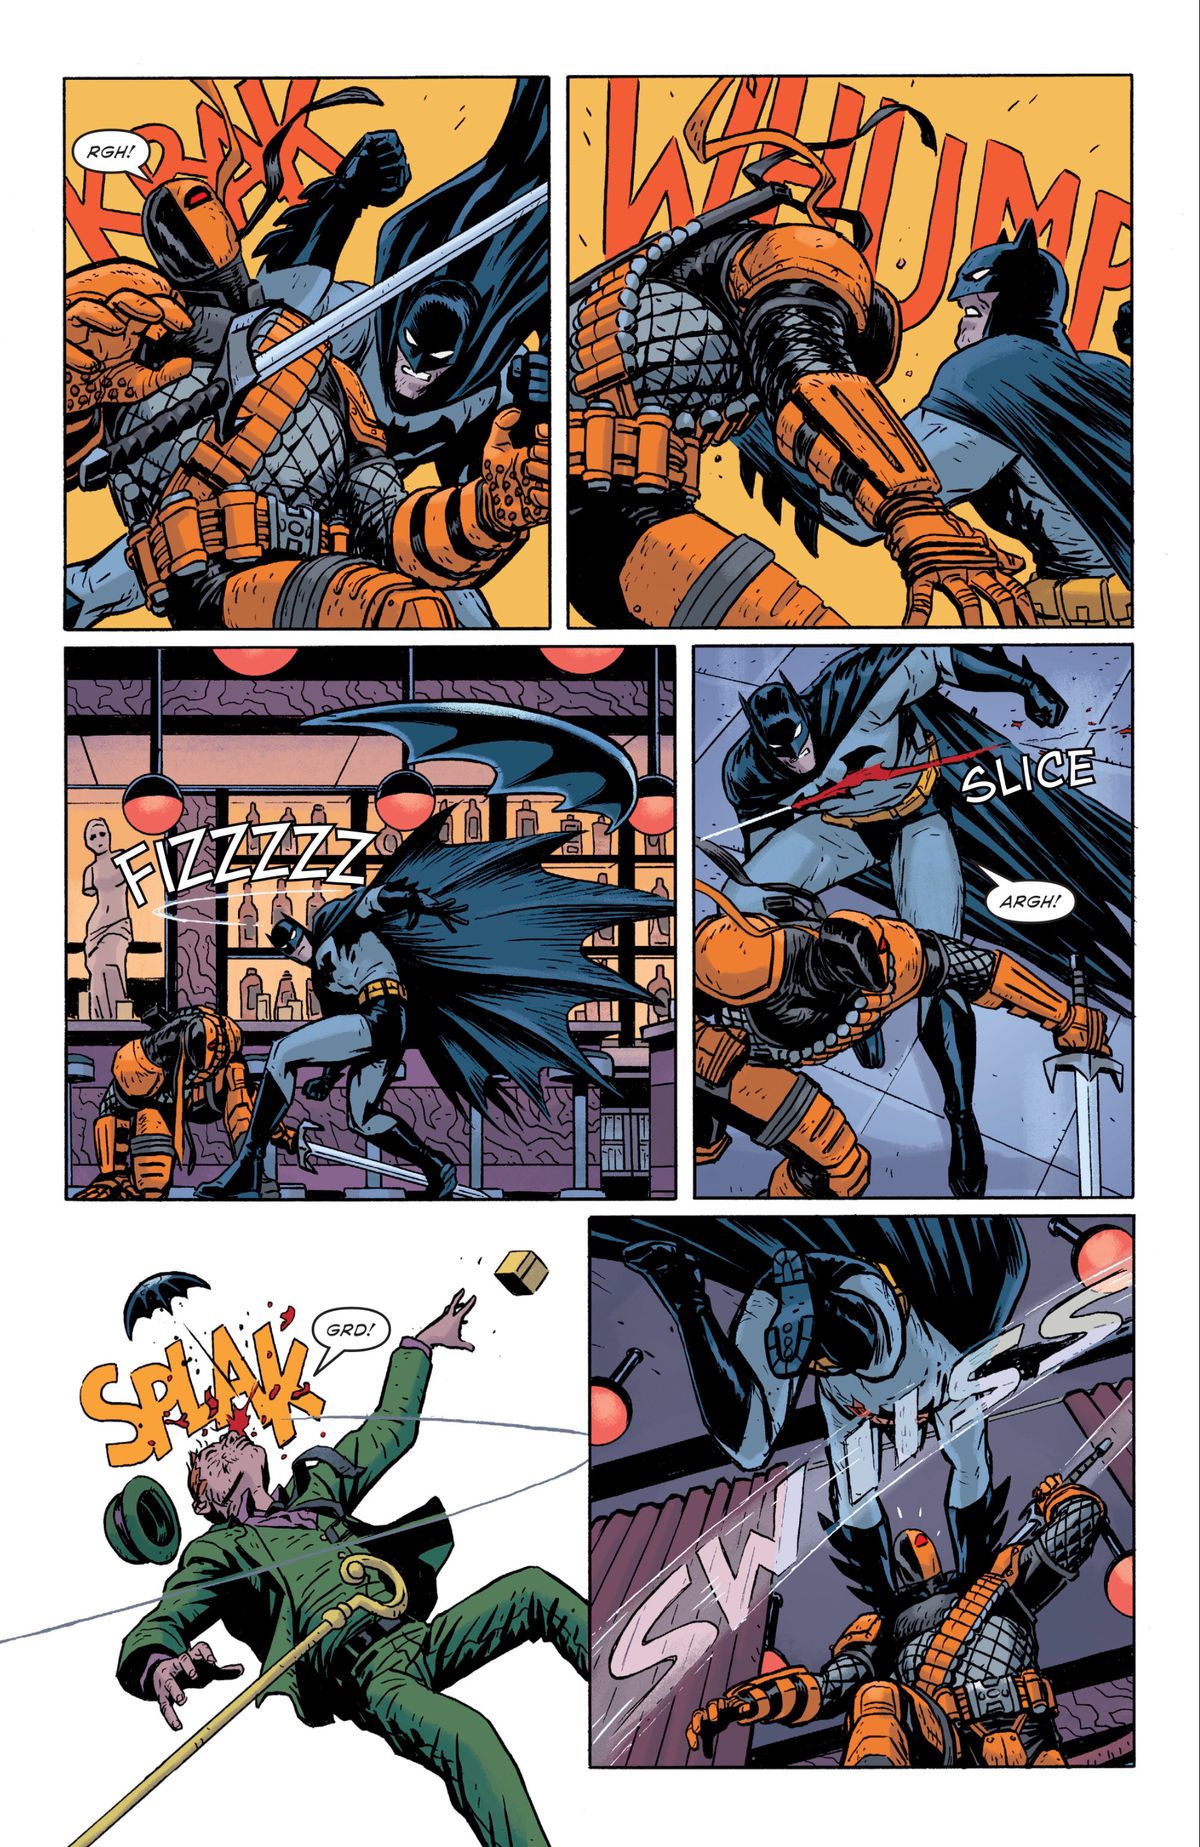 Batman and Deathstroke fight (the Riddler gets clocked) in Batman Universe #1, DC Comics (2019). 